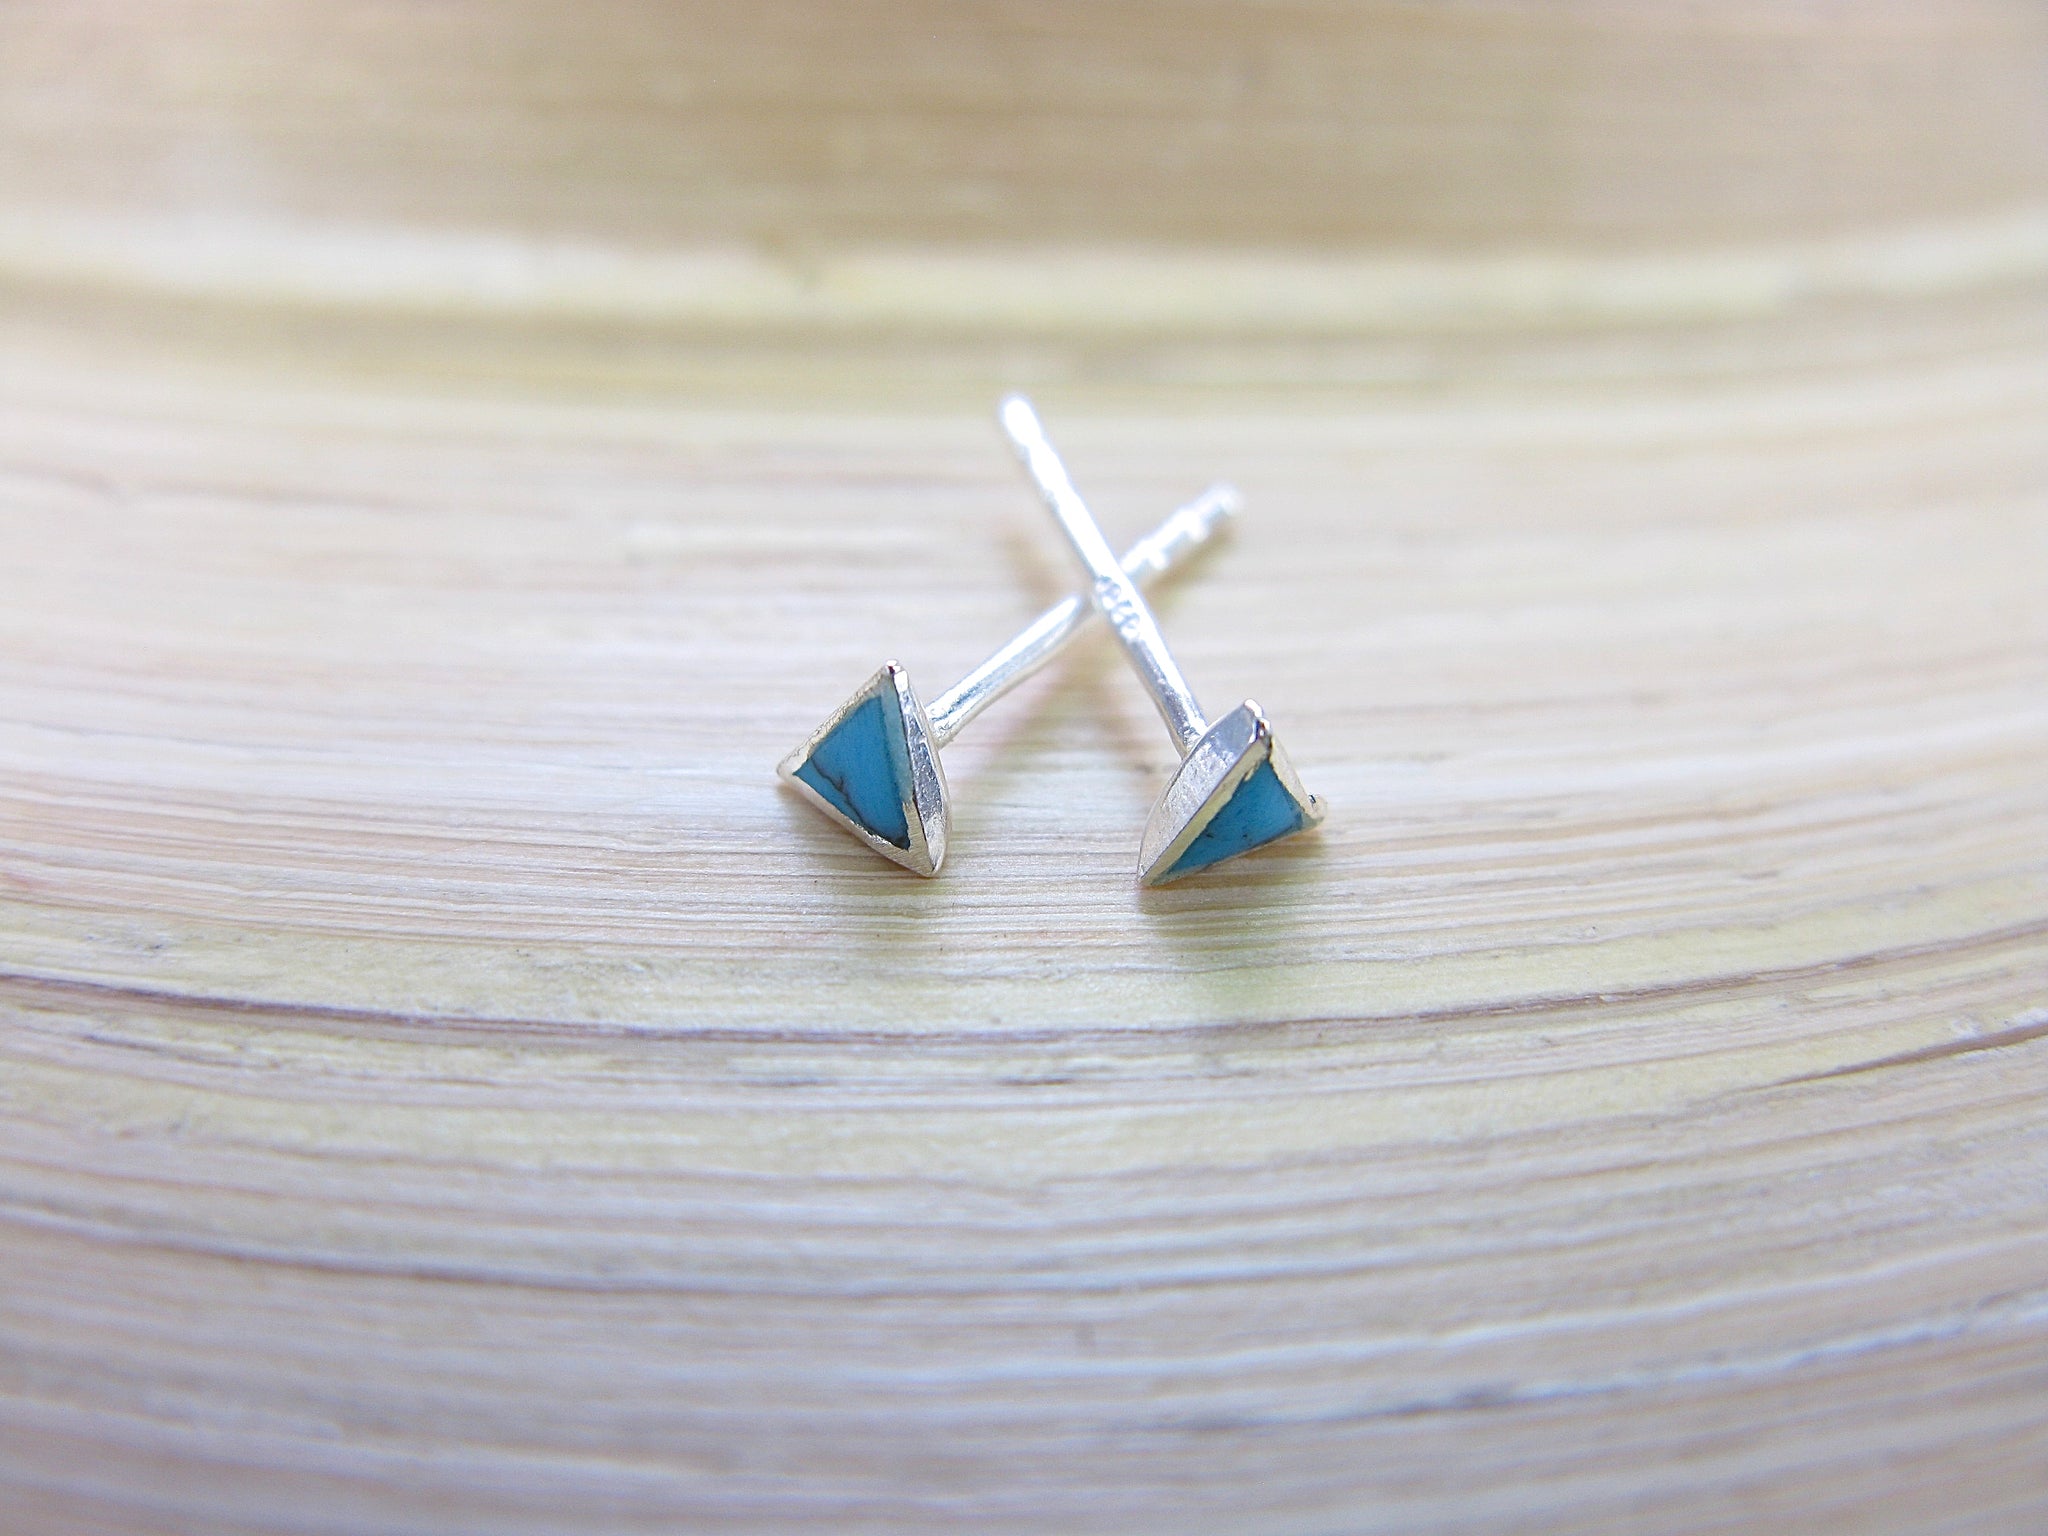 Turquoise 3mm Tiny Triangle Stud Earrings in 925 Sterling Silver